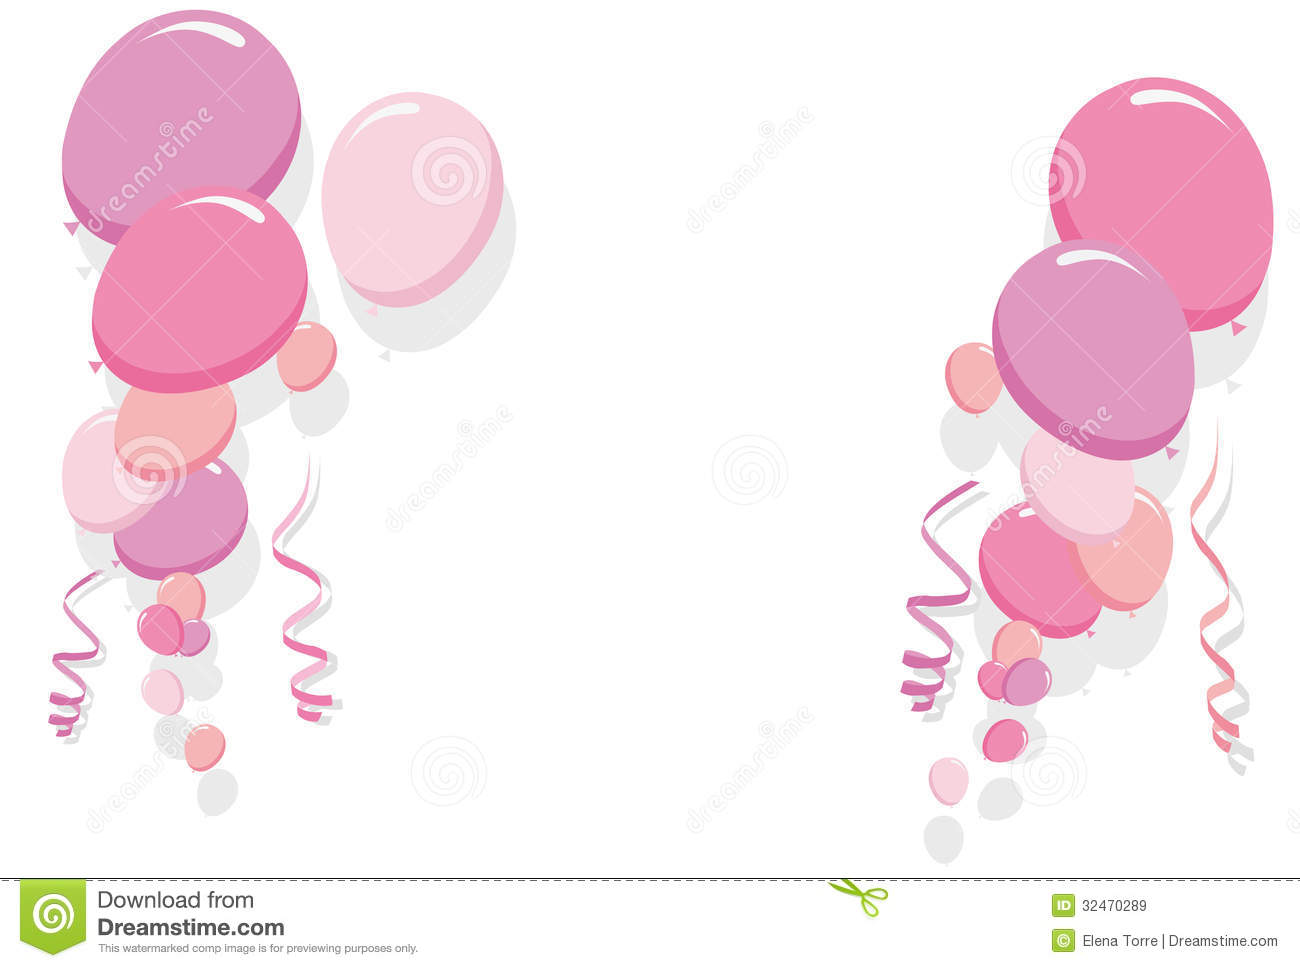 Pink Balloons Border Vector Royalty Free Stock Images   Image